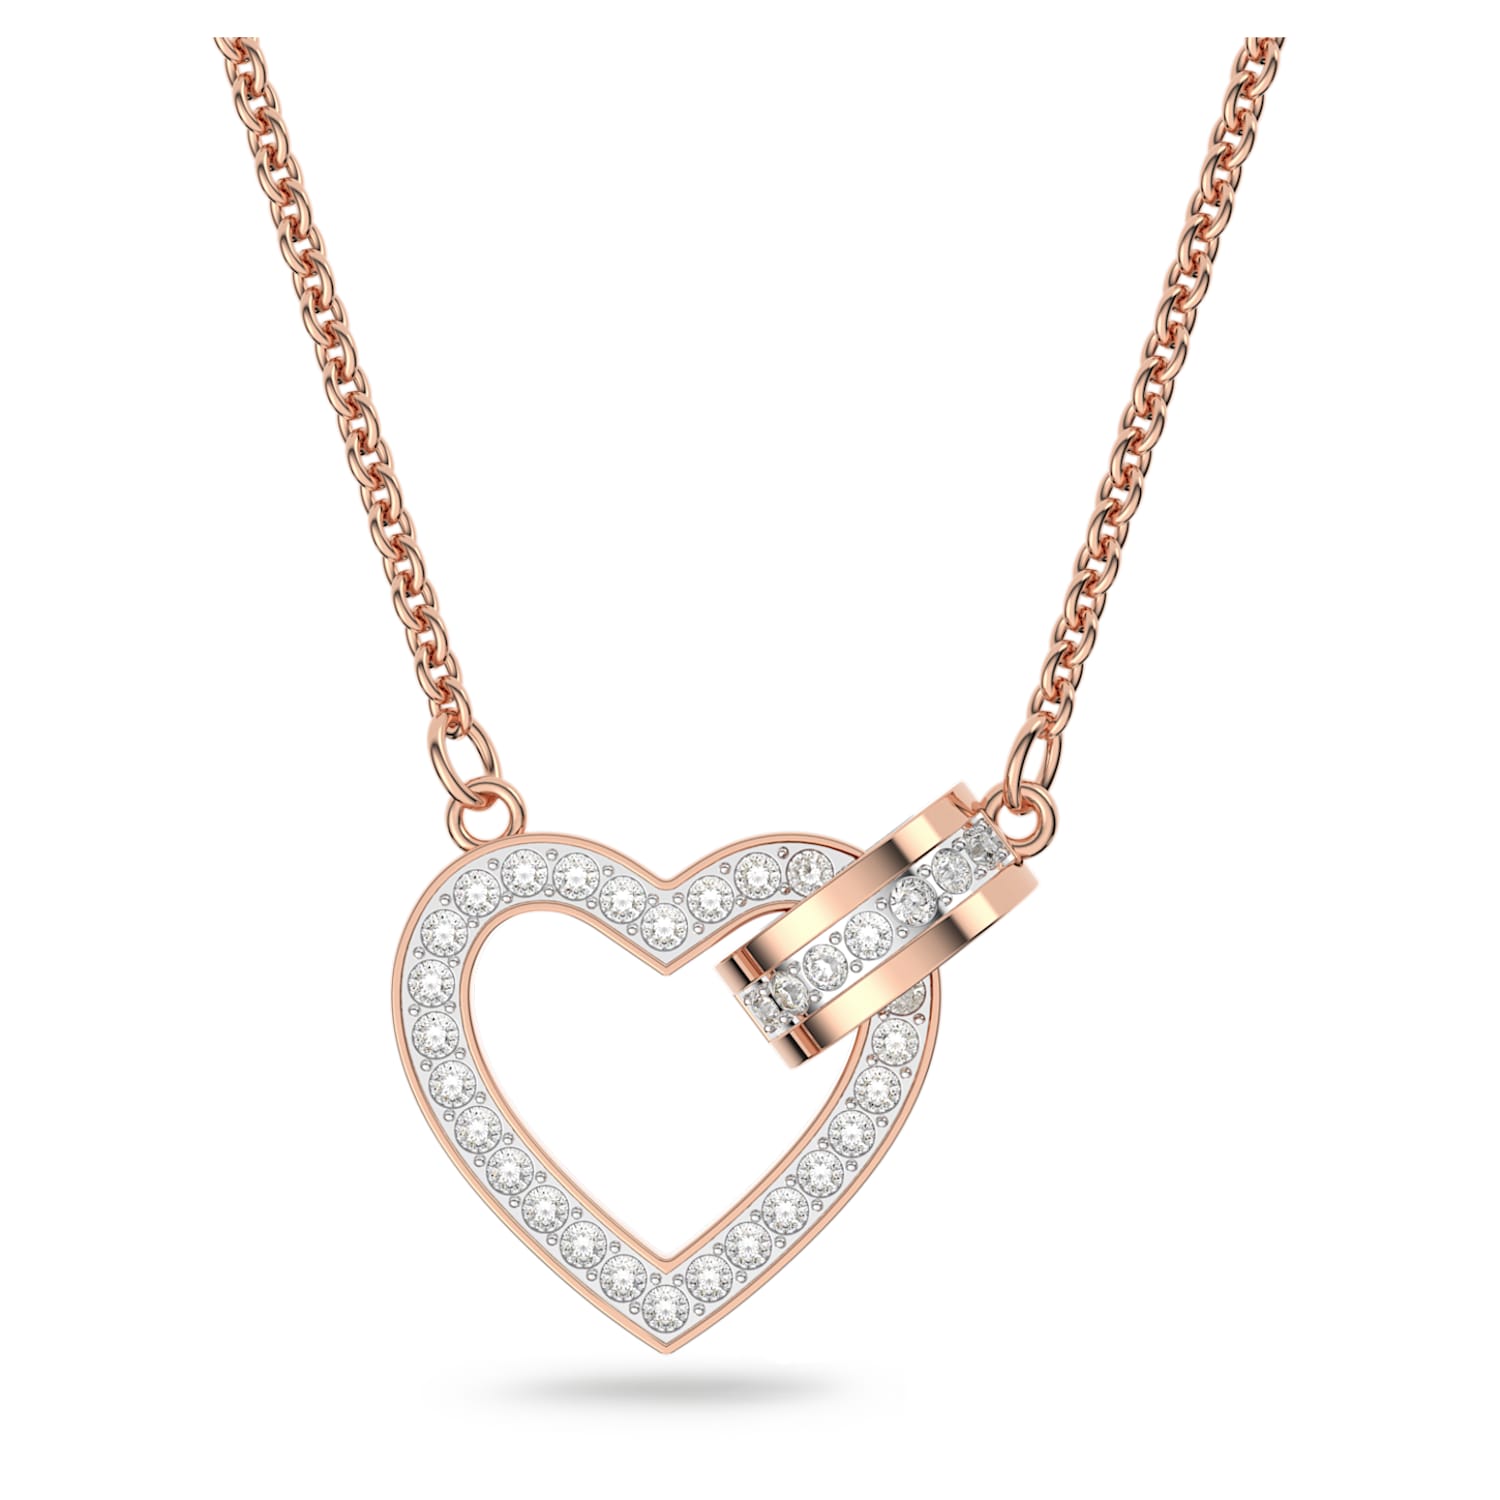 Lovely Necklace Swarovski Top Sellers, 51% OFF | www 